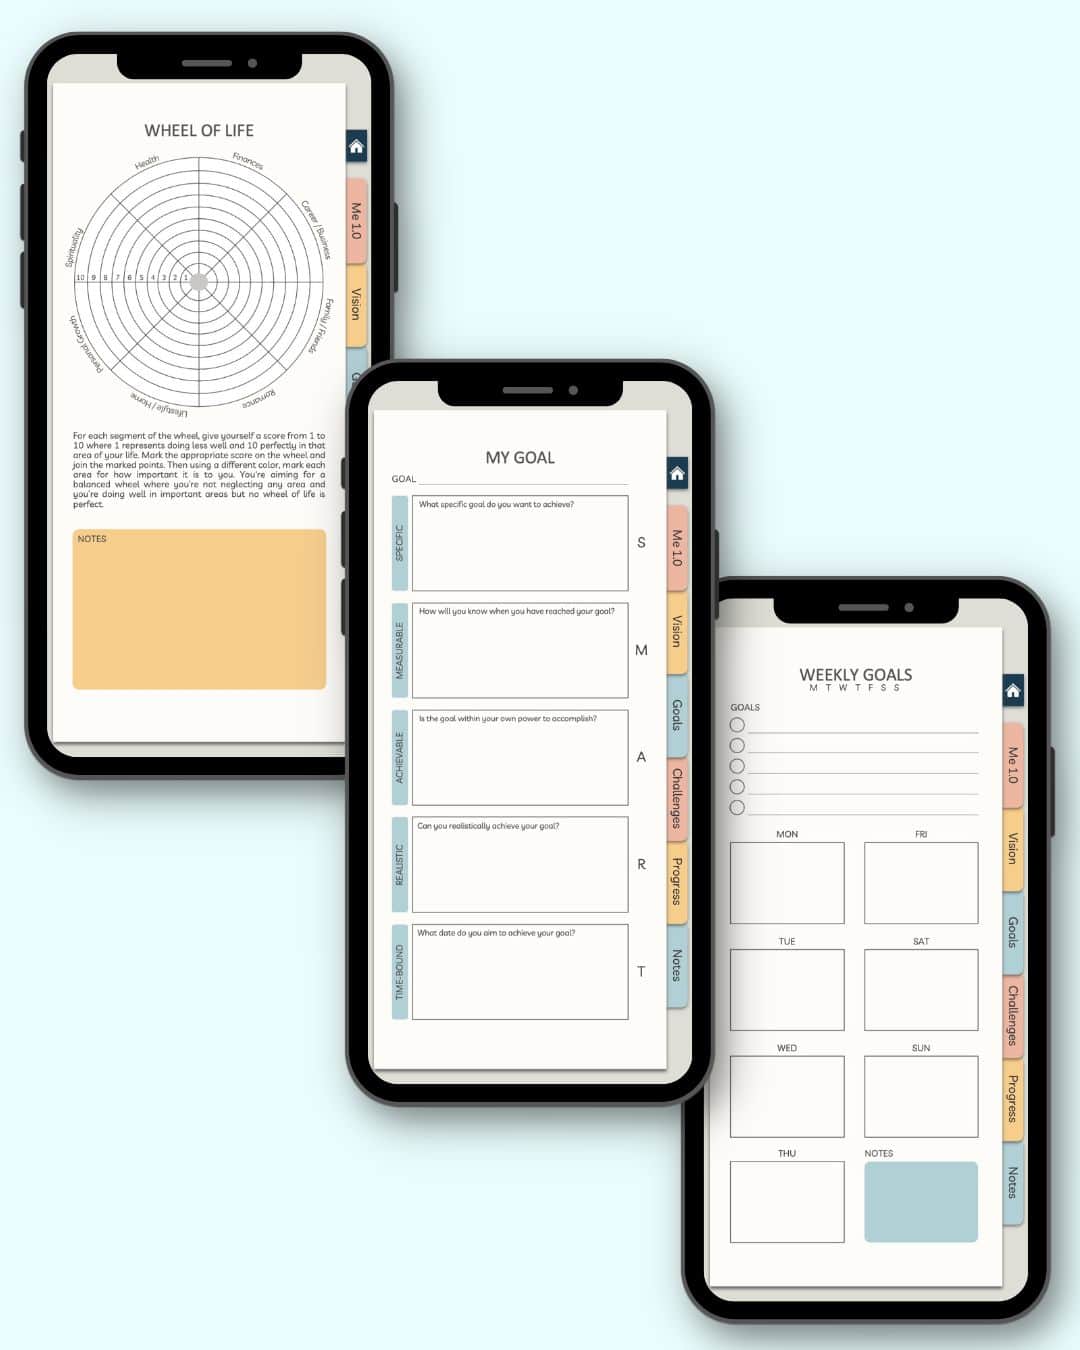 Preview of there pages from a digital smartphone planner including a wheel of life evaluation, goals planner, and weekly goals planner